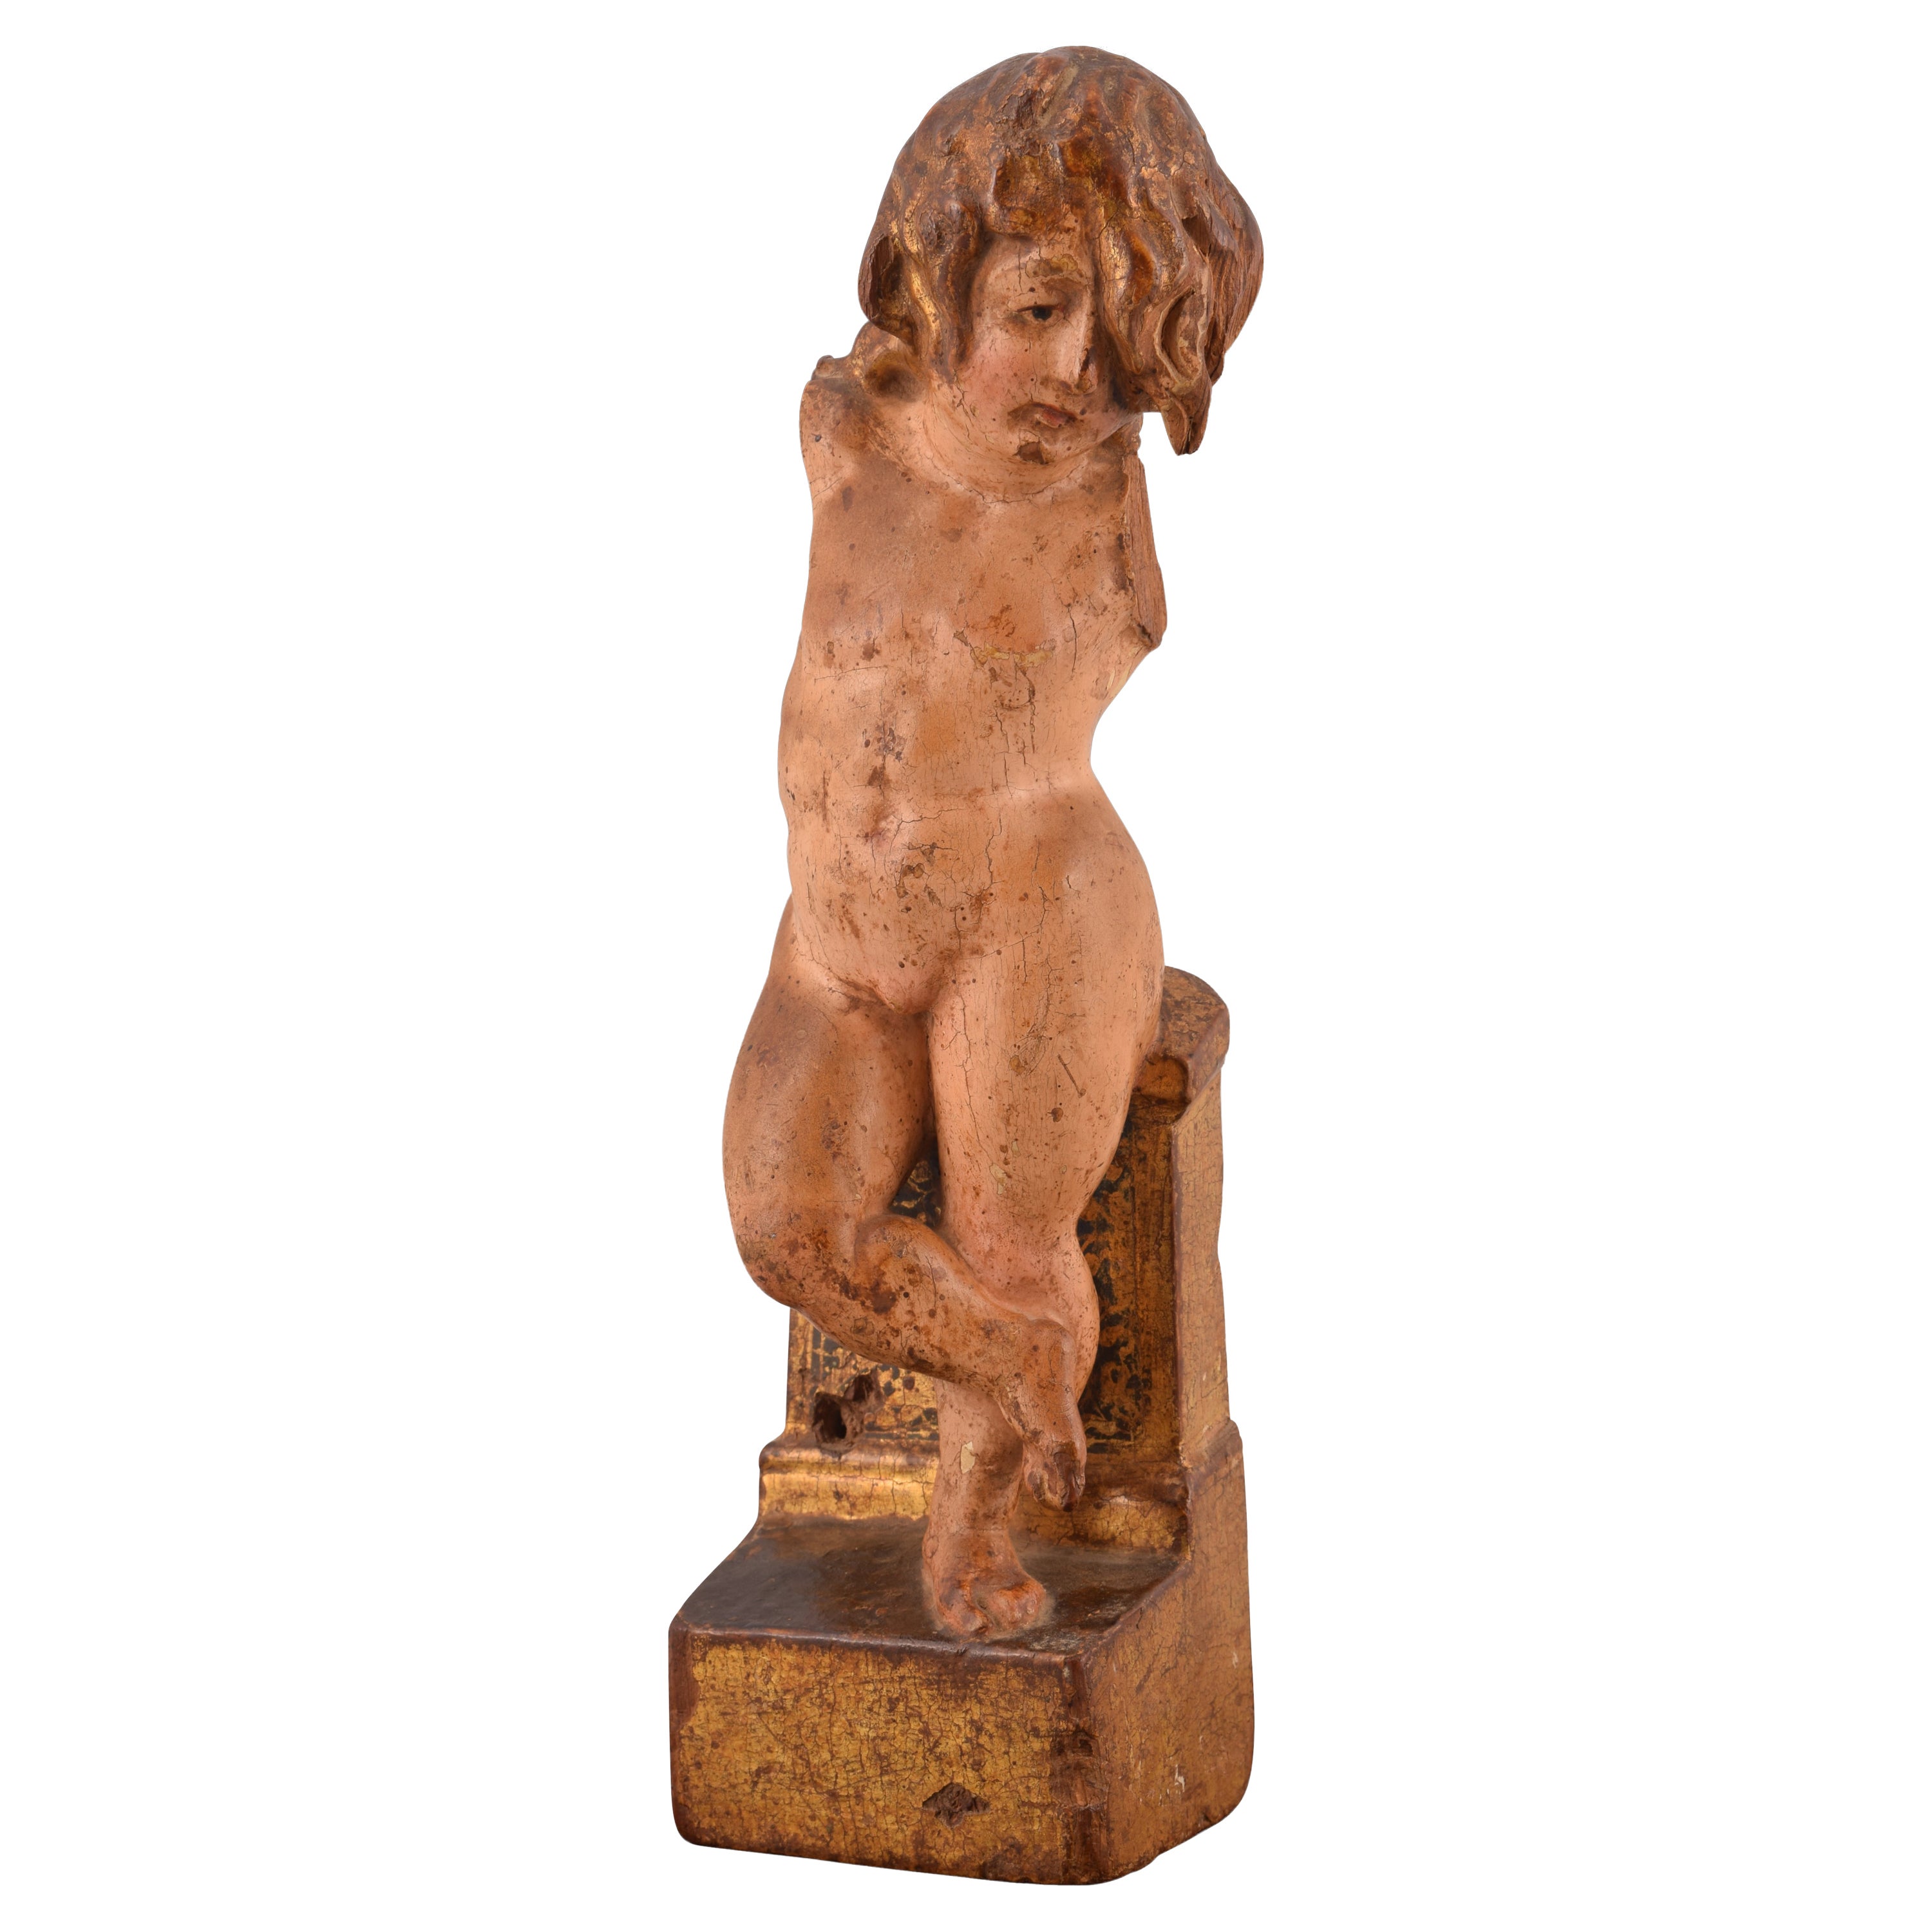 Baby Jesus or angel. Carved, polychrome and gilded wood. Spanish school, 16th c. For Sale